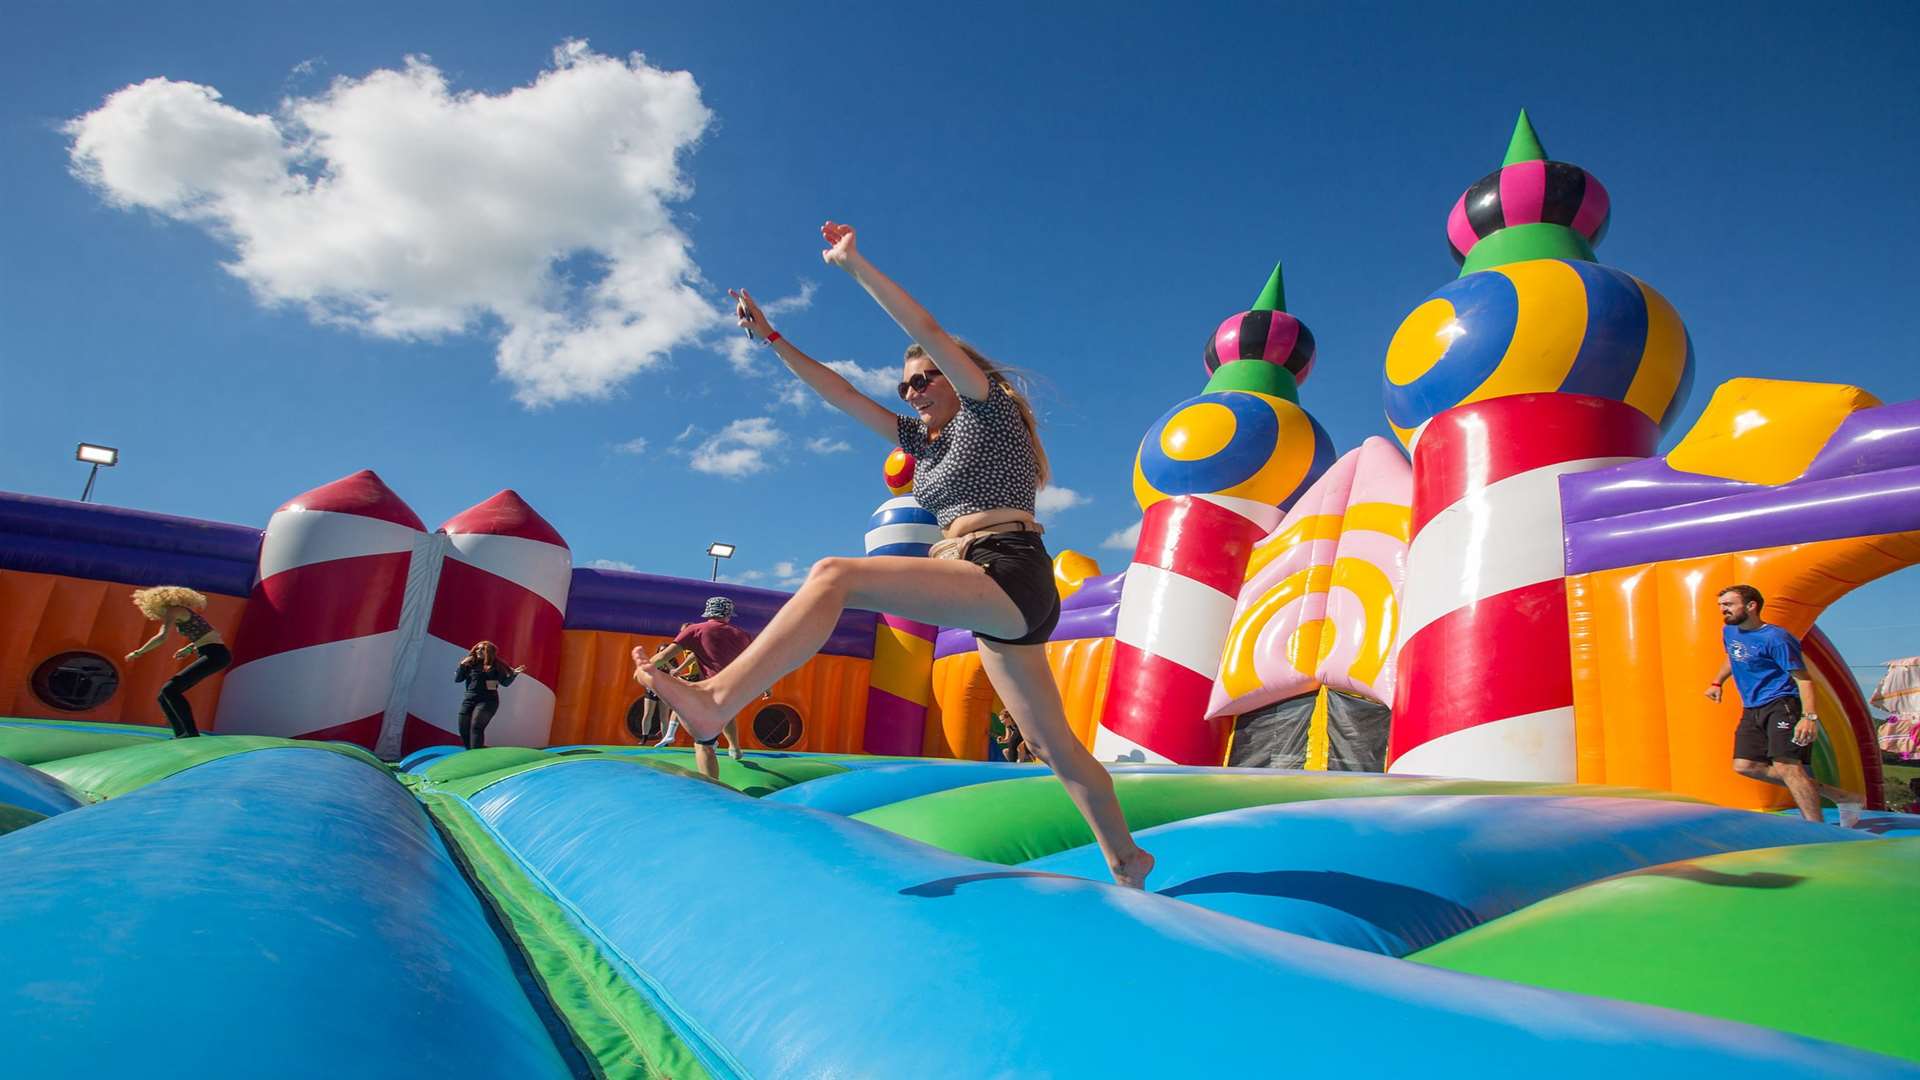 The world's biggest bouncy castle is at Dreamland today